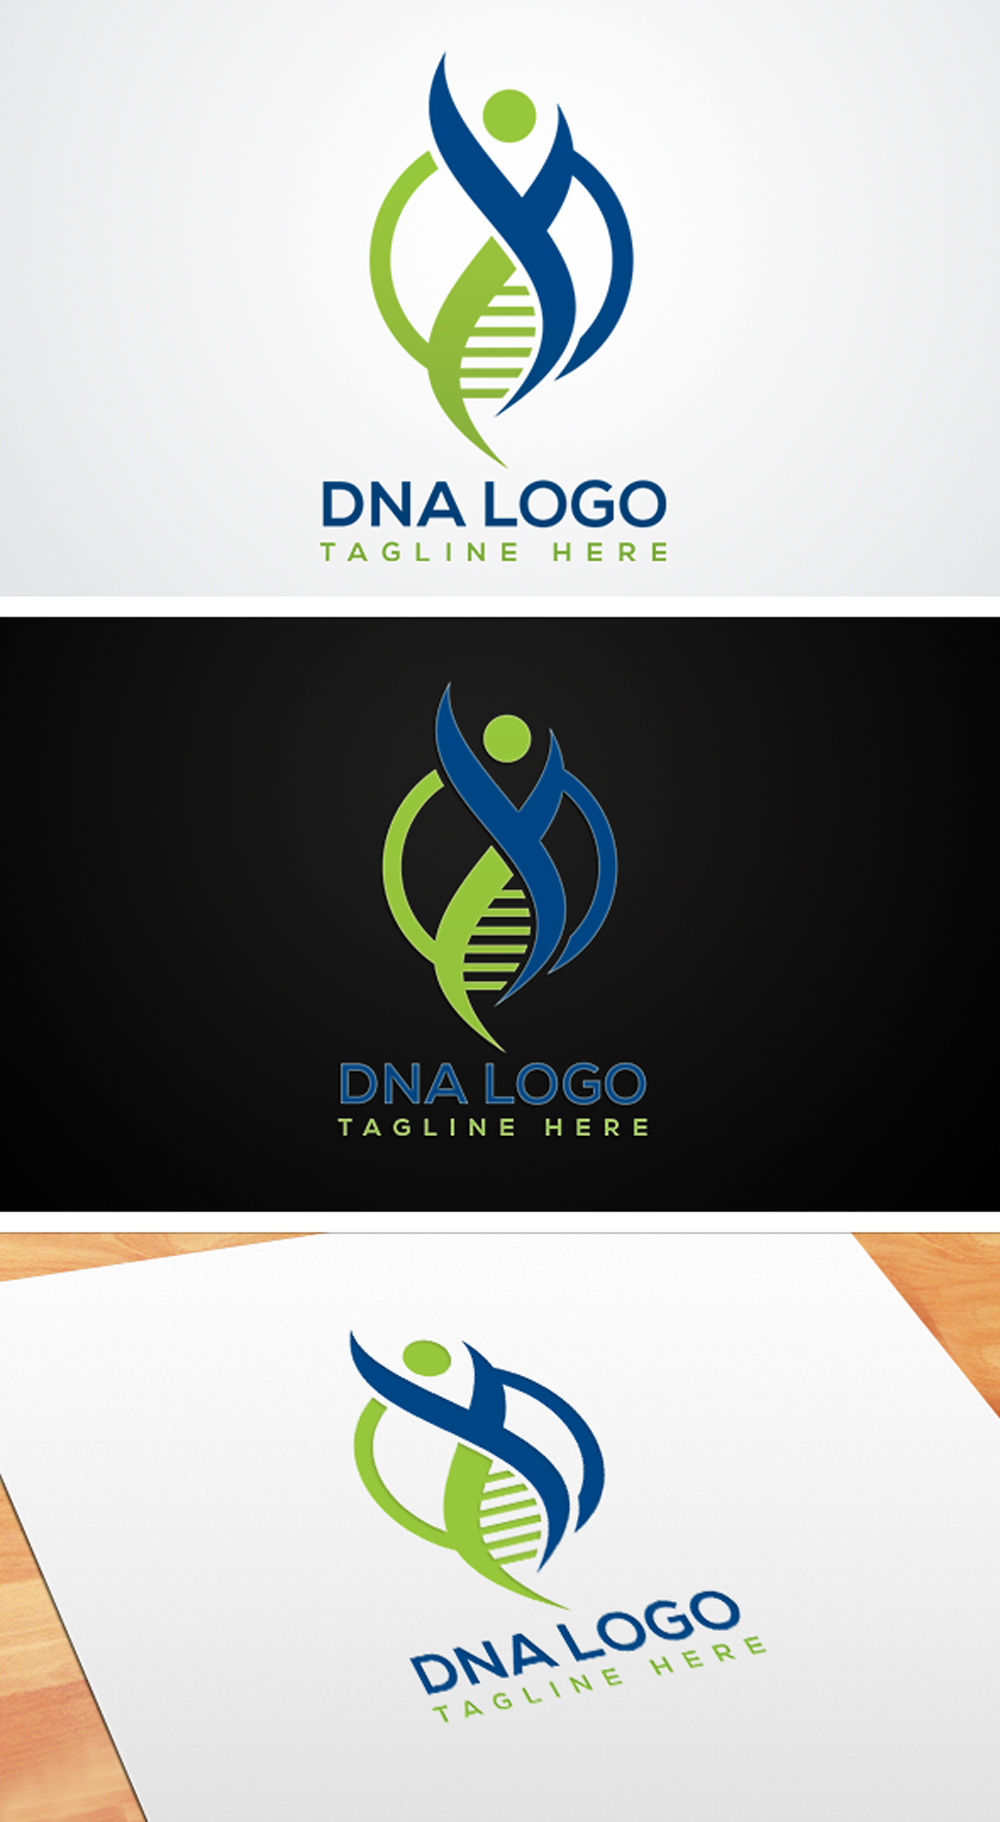 A pack of images of wonderful logos in the form of a DNA shape.